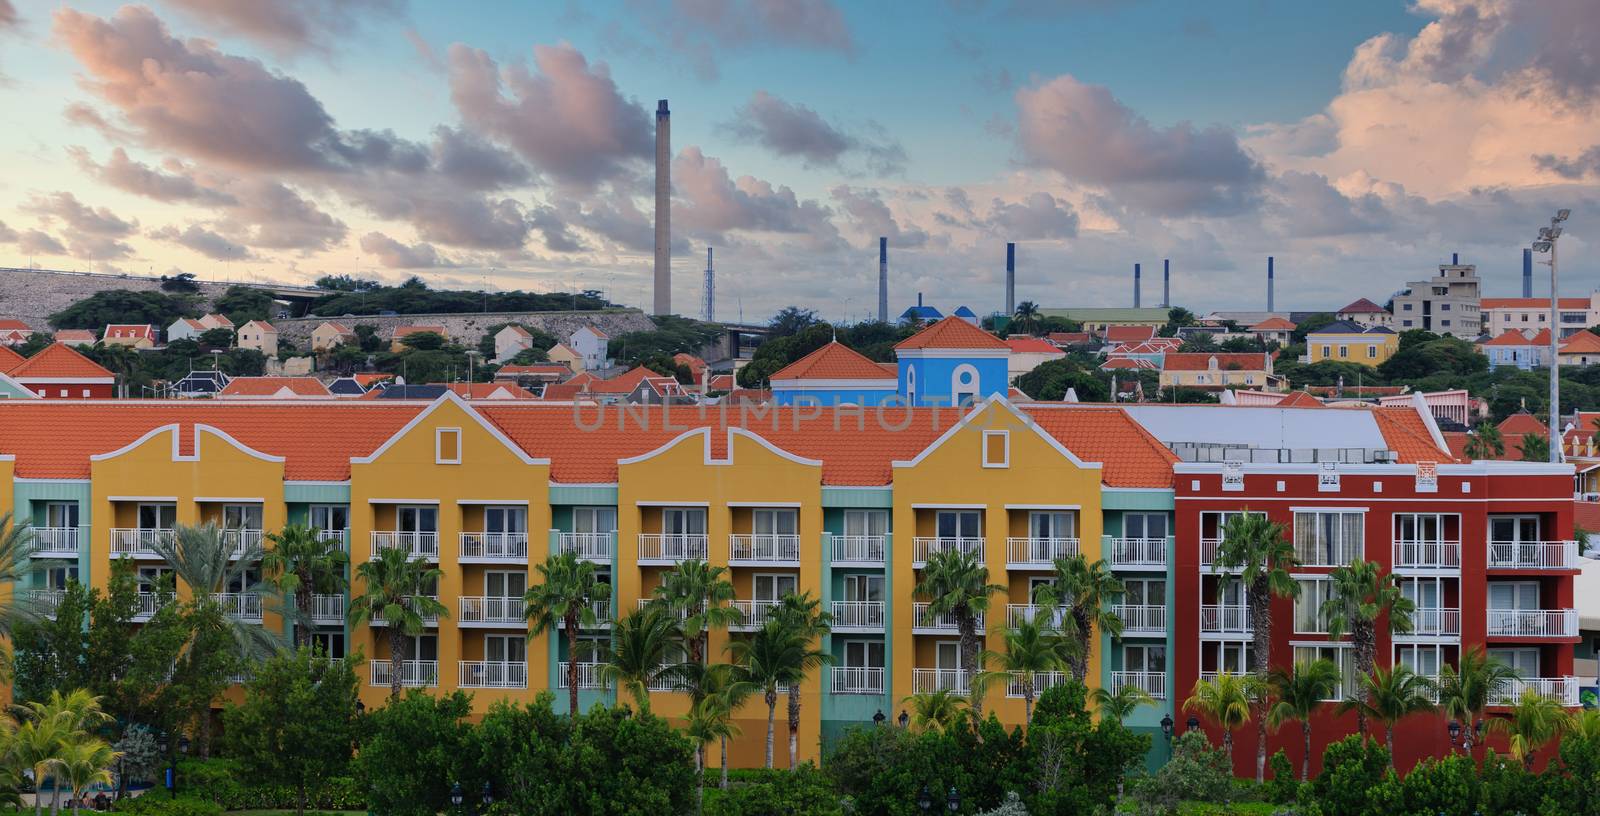 Colorful Resort with Oil Refinery in Background on Curacao